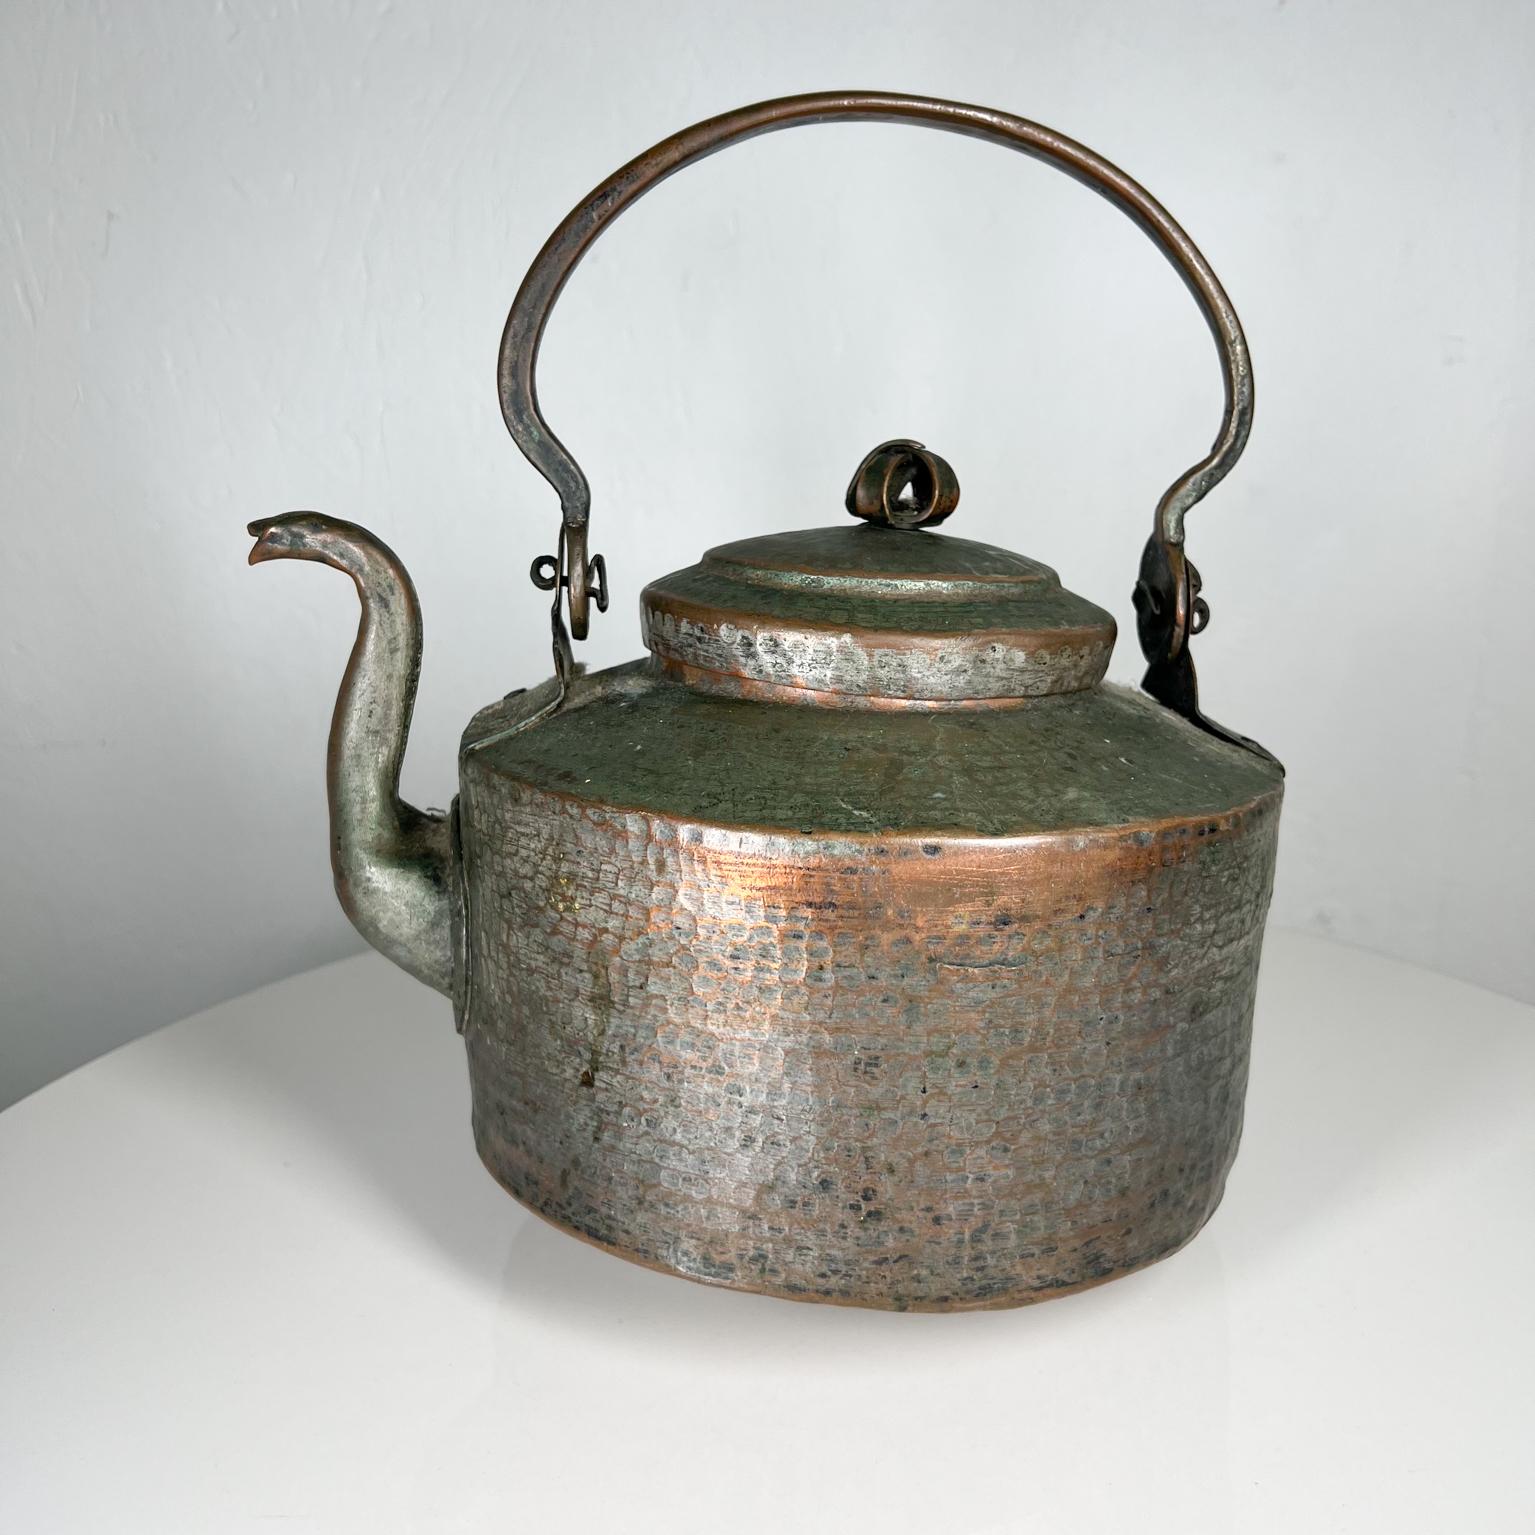 Antique Rustic Hammered Copper Tea Kettle with Flair For Sale 3